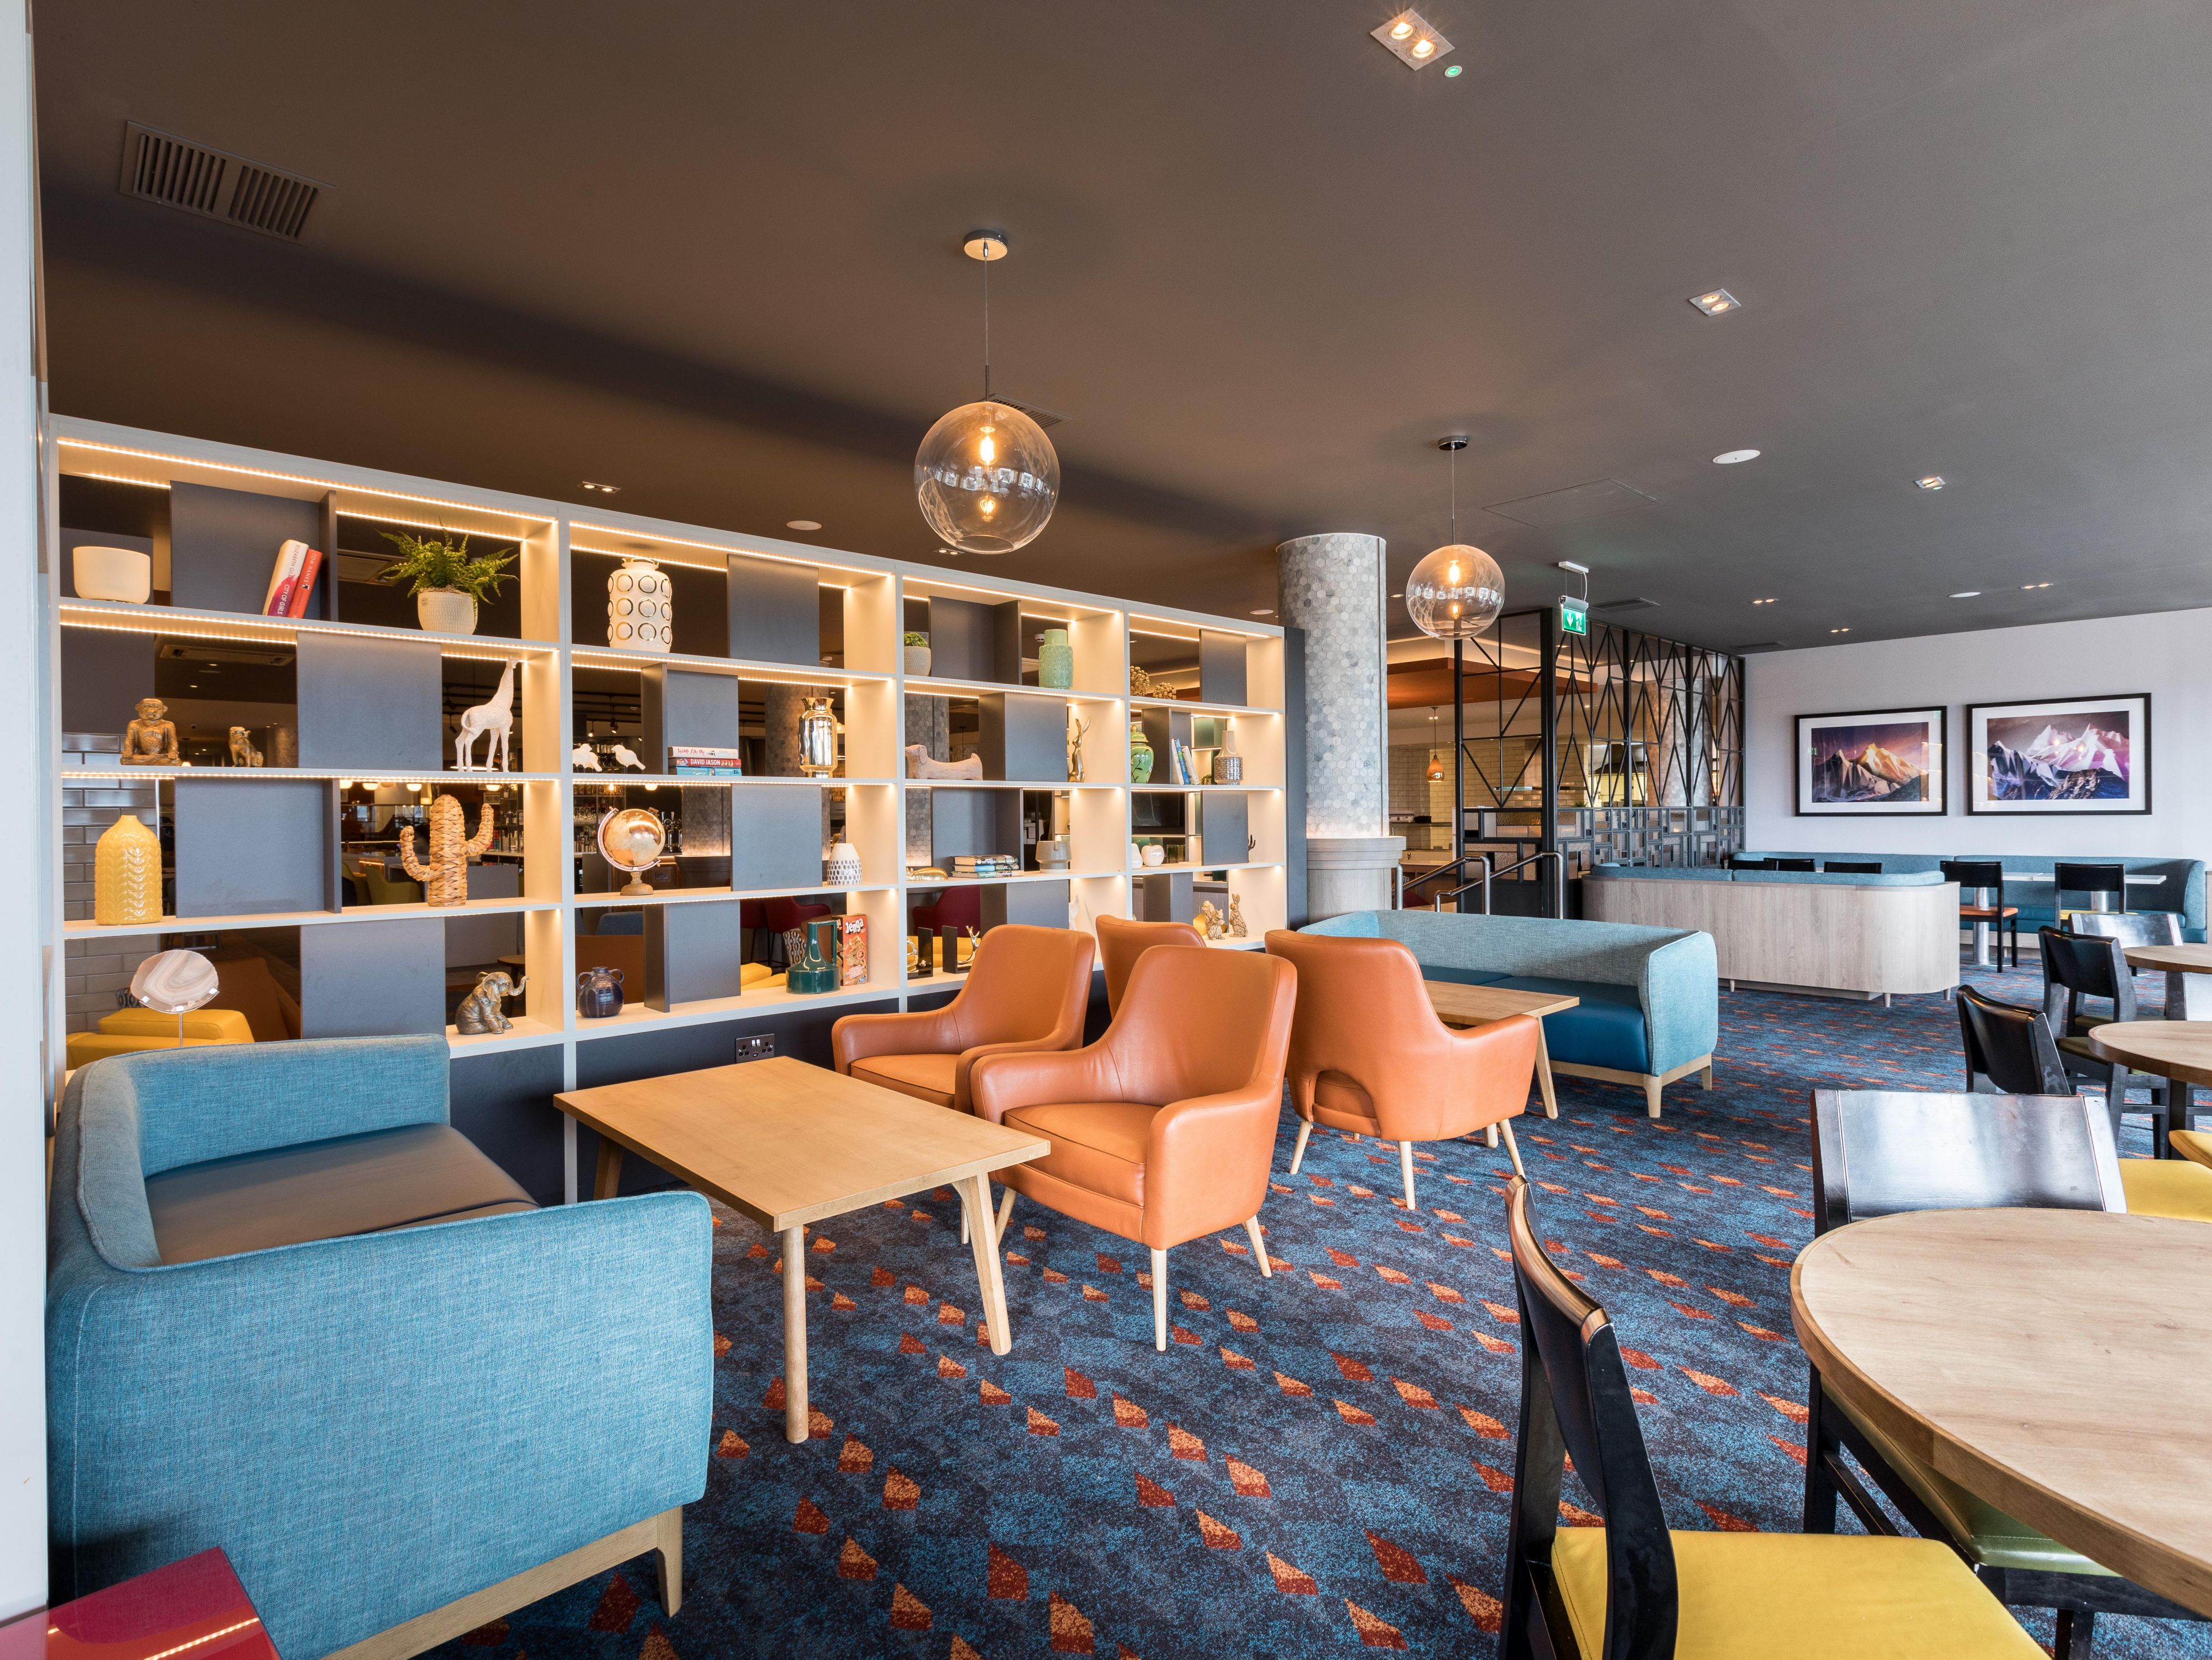 The Open Lobby combines the front desk, lobby, bar, lounge, restaurant and Business Centre into one flexible, open space, allowing our guests to use the space to meet their requirements throughout their visit, whether that's to work, relax, eat and drink or socialise.